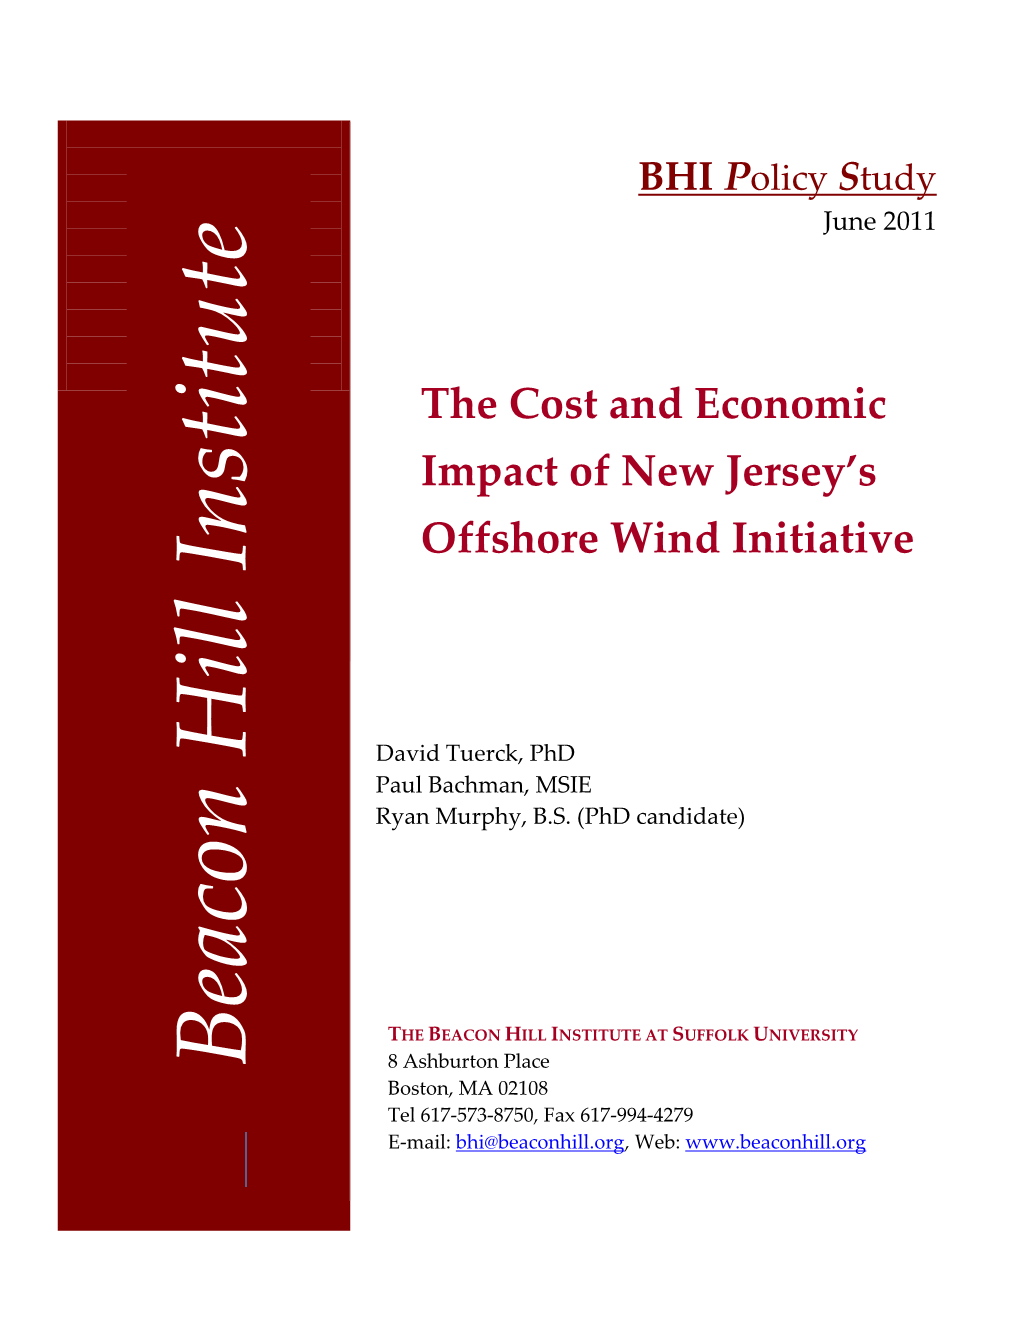 The Cost and Economic Impact of New Jersey's Offshore Wind Initiative